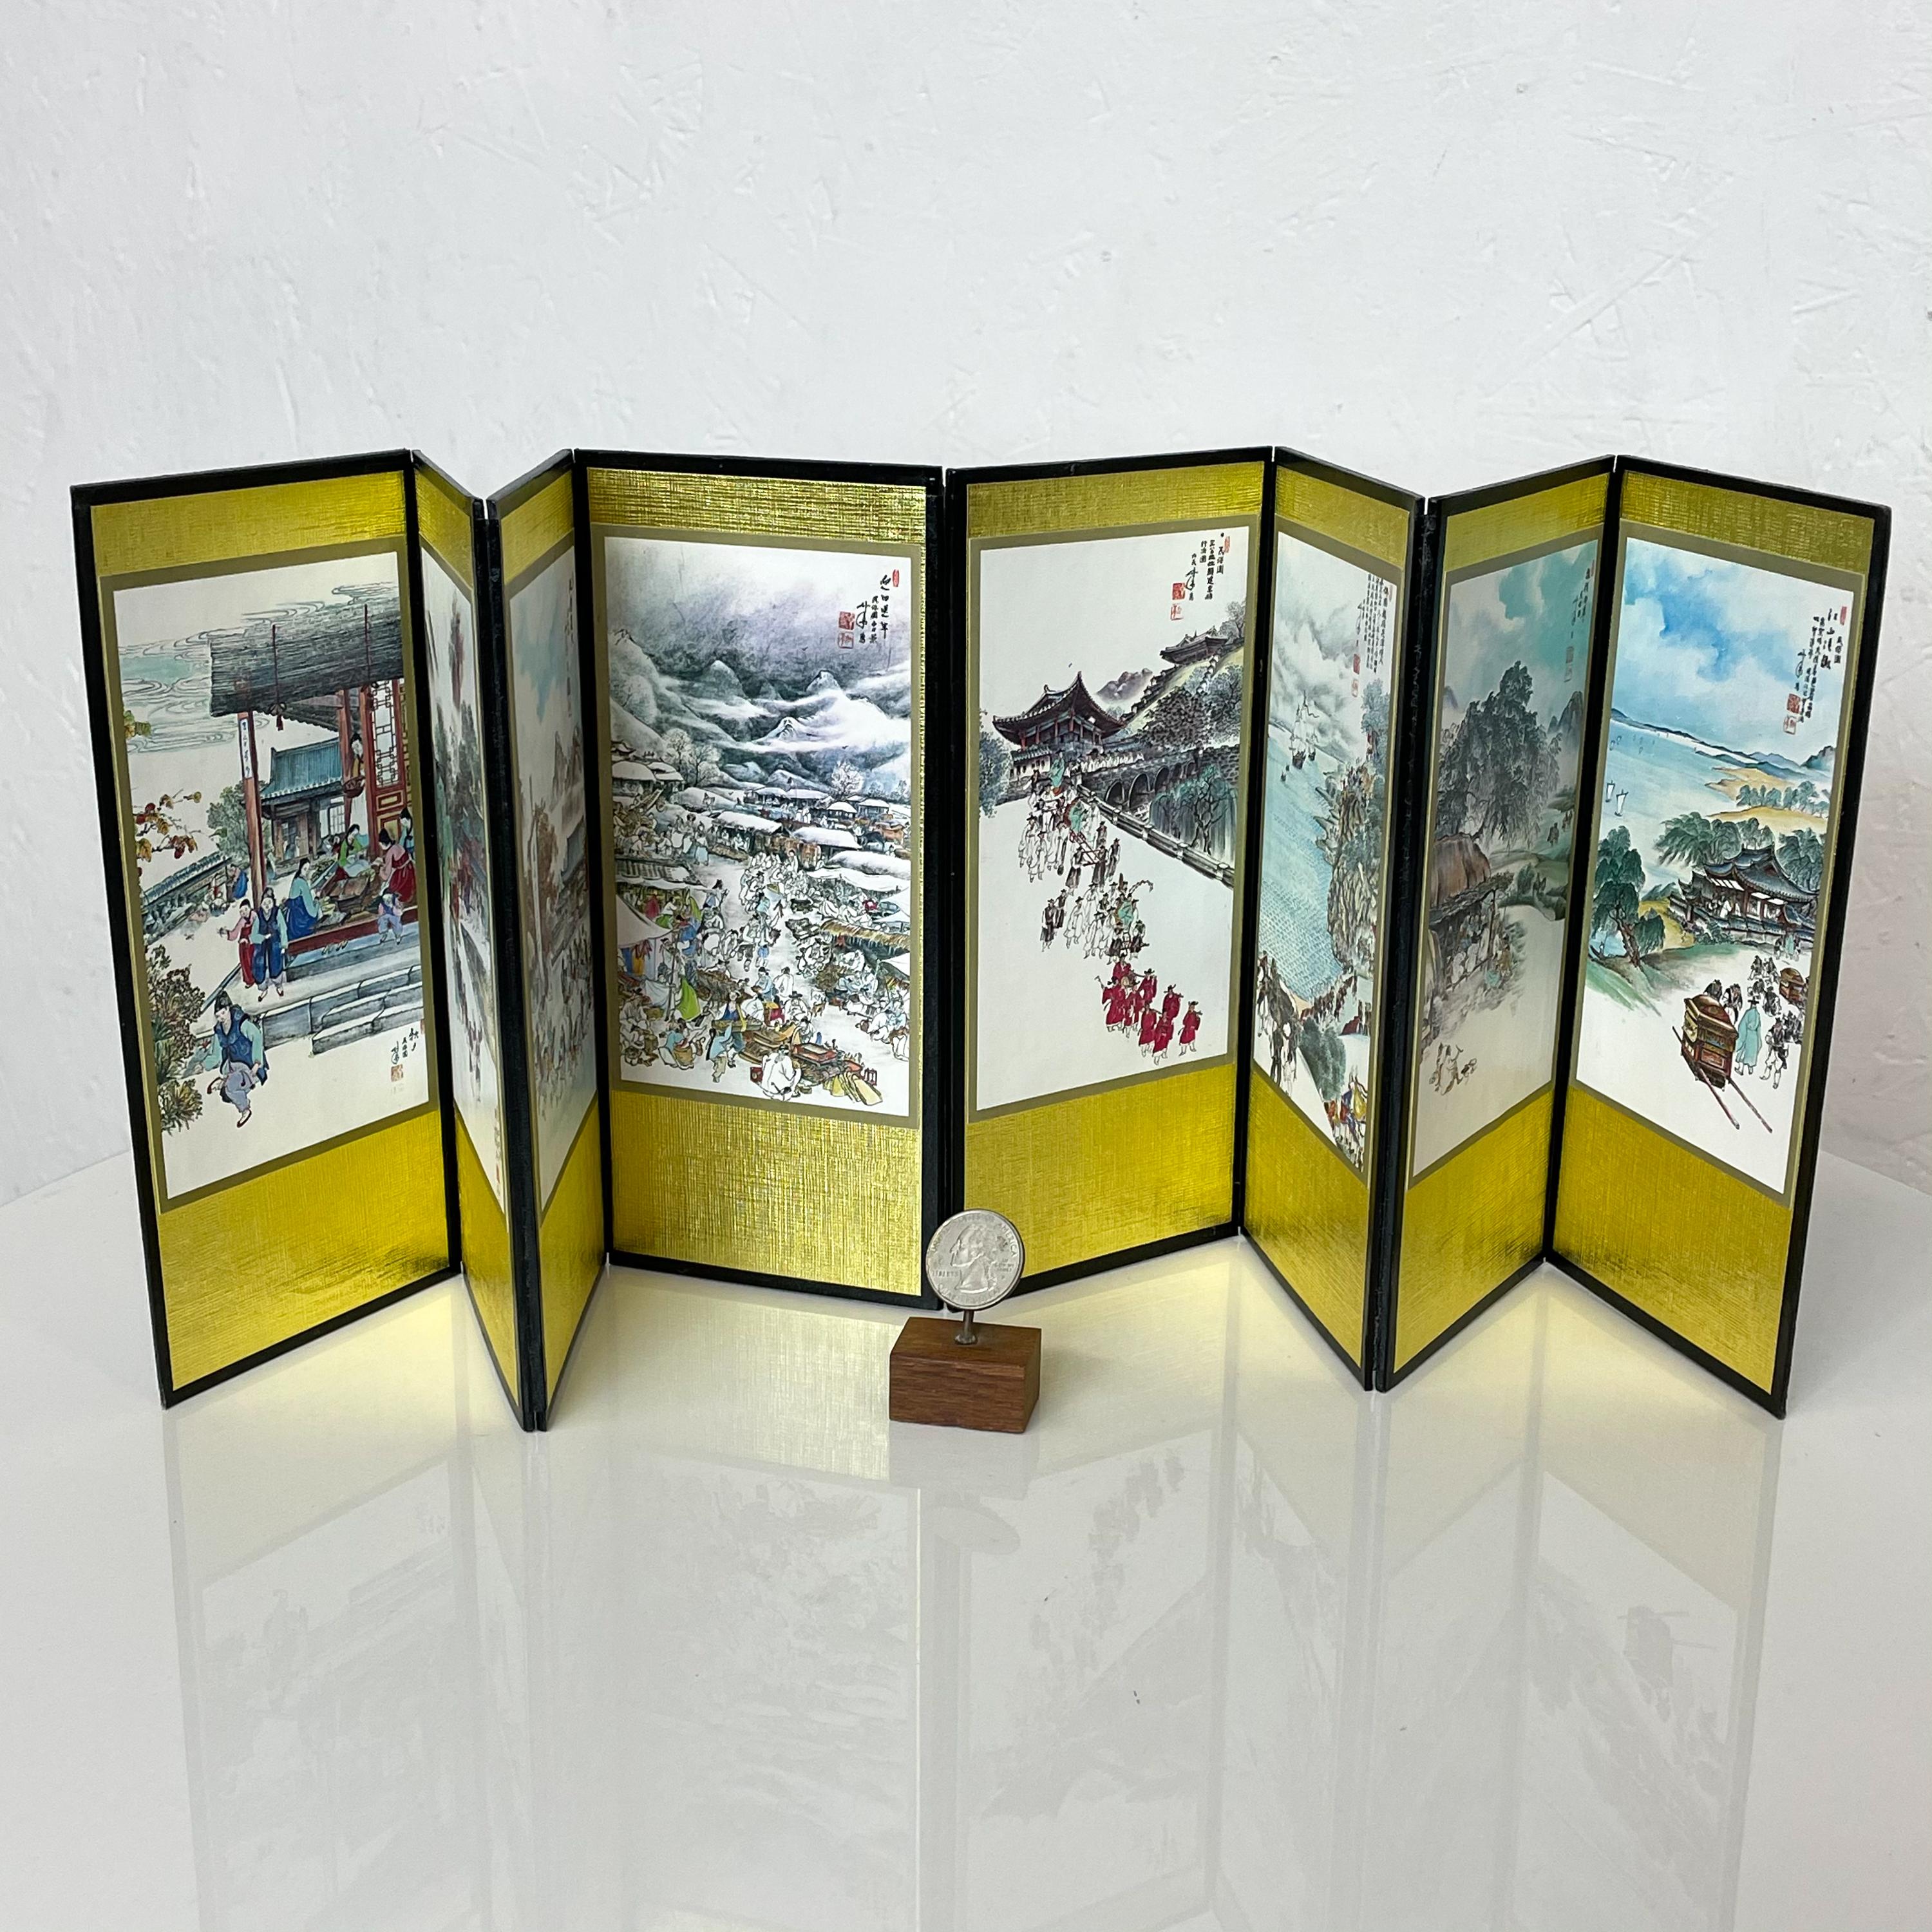 Asian folding mini divider screen eight panels scenic landscape + Chinese writing Collectible Chinese
Colorful illustrations in black blue and vibrant gold
Measures: 3.63 W x 8.38 Tall x .13D inch each panel, Folded 1 inch thick
Original unrestored